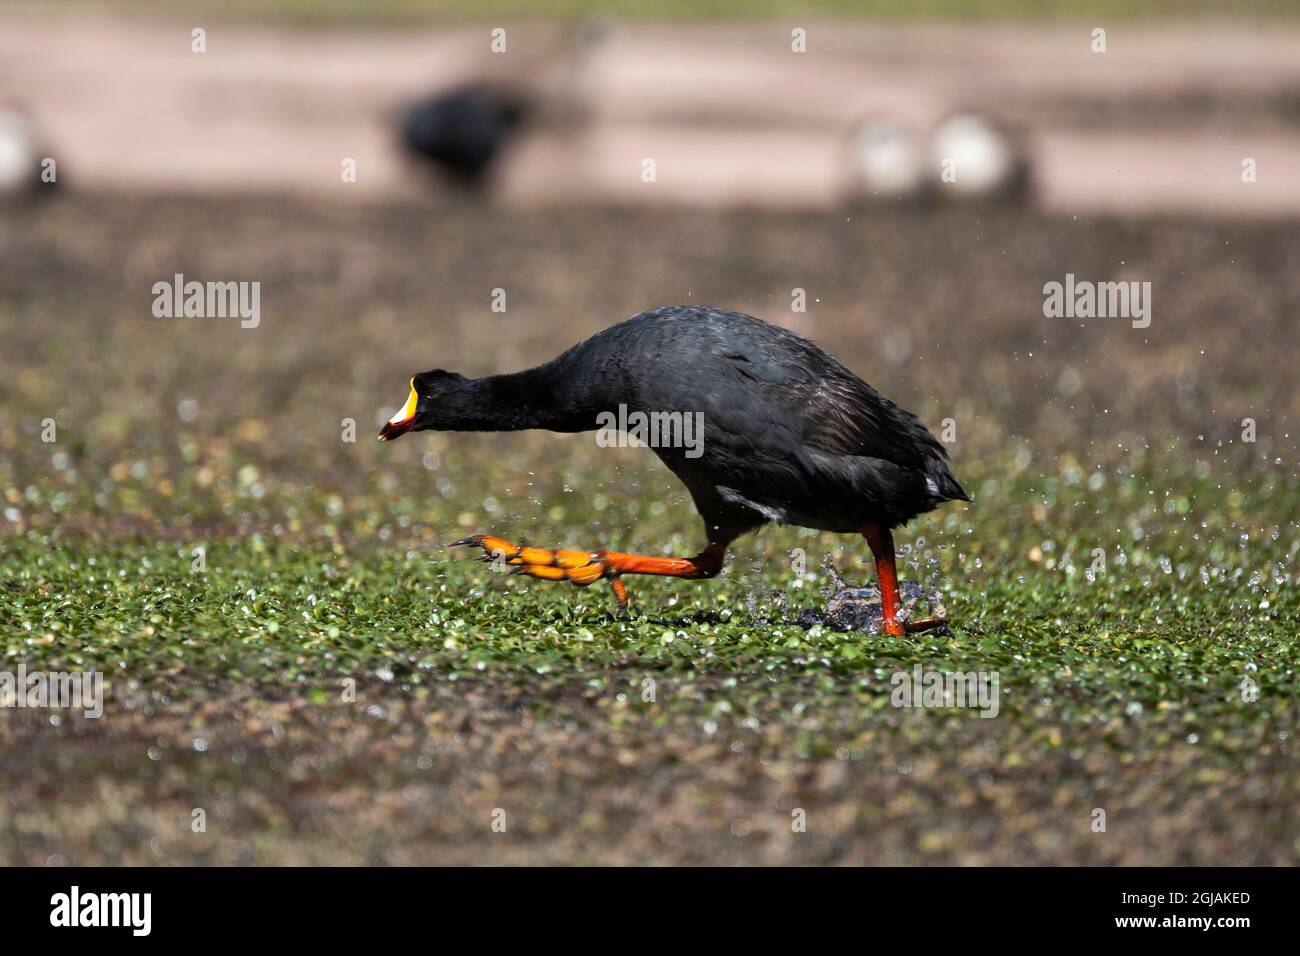 Chile, Machuca, giant coot, Fulica gigantea. Portrait of a giant coot showing its enormous red and orange feet. Stock Photo